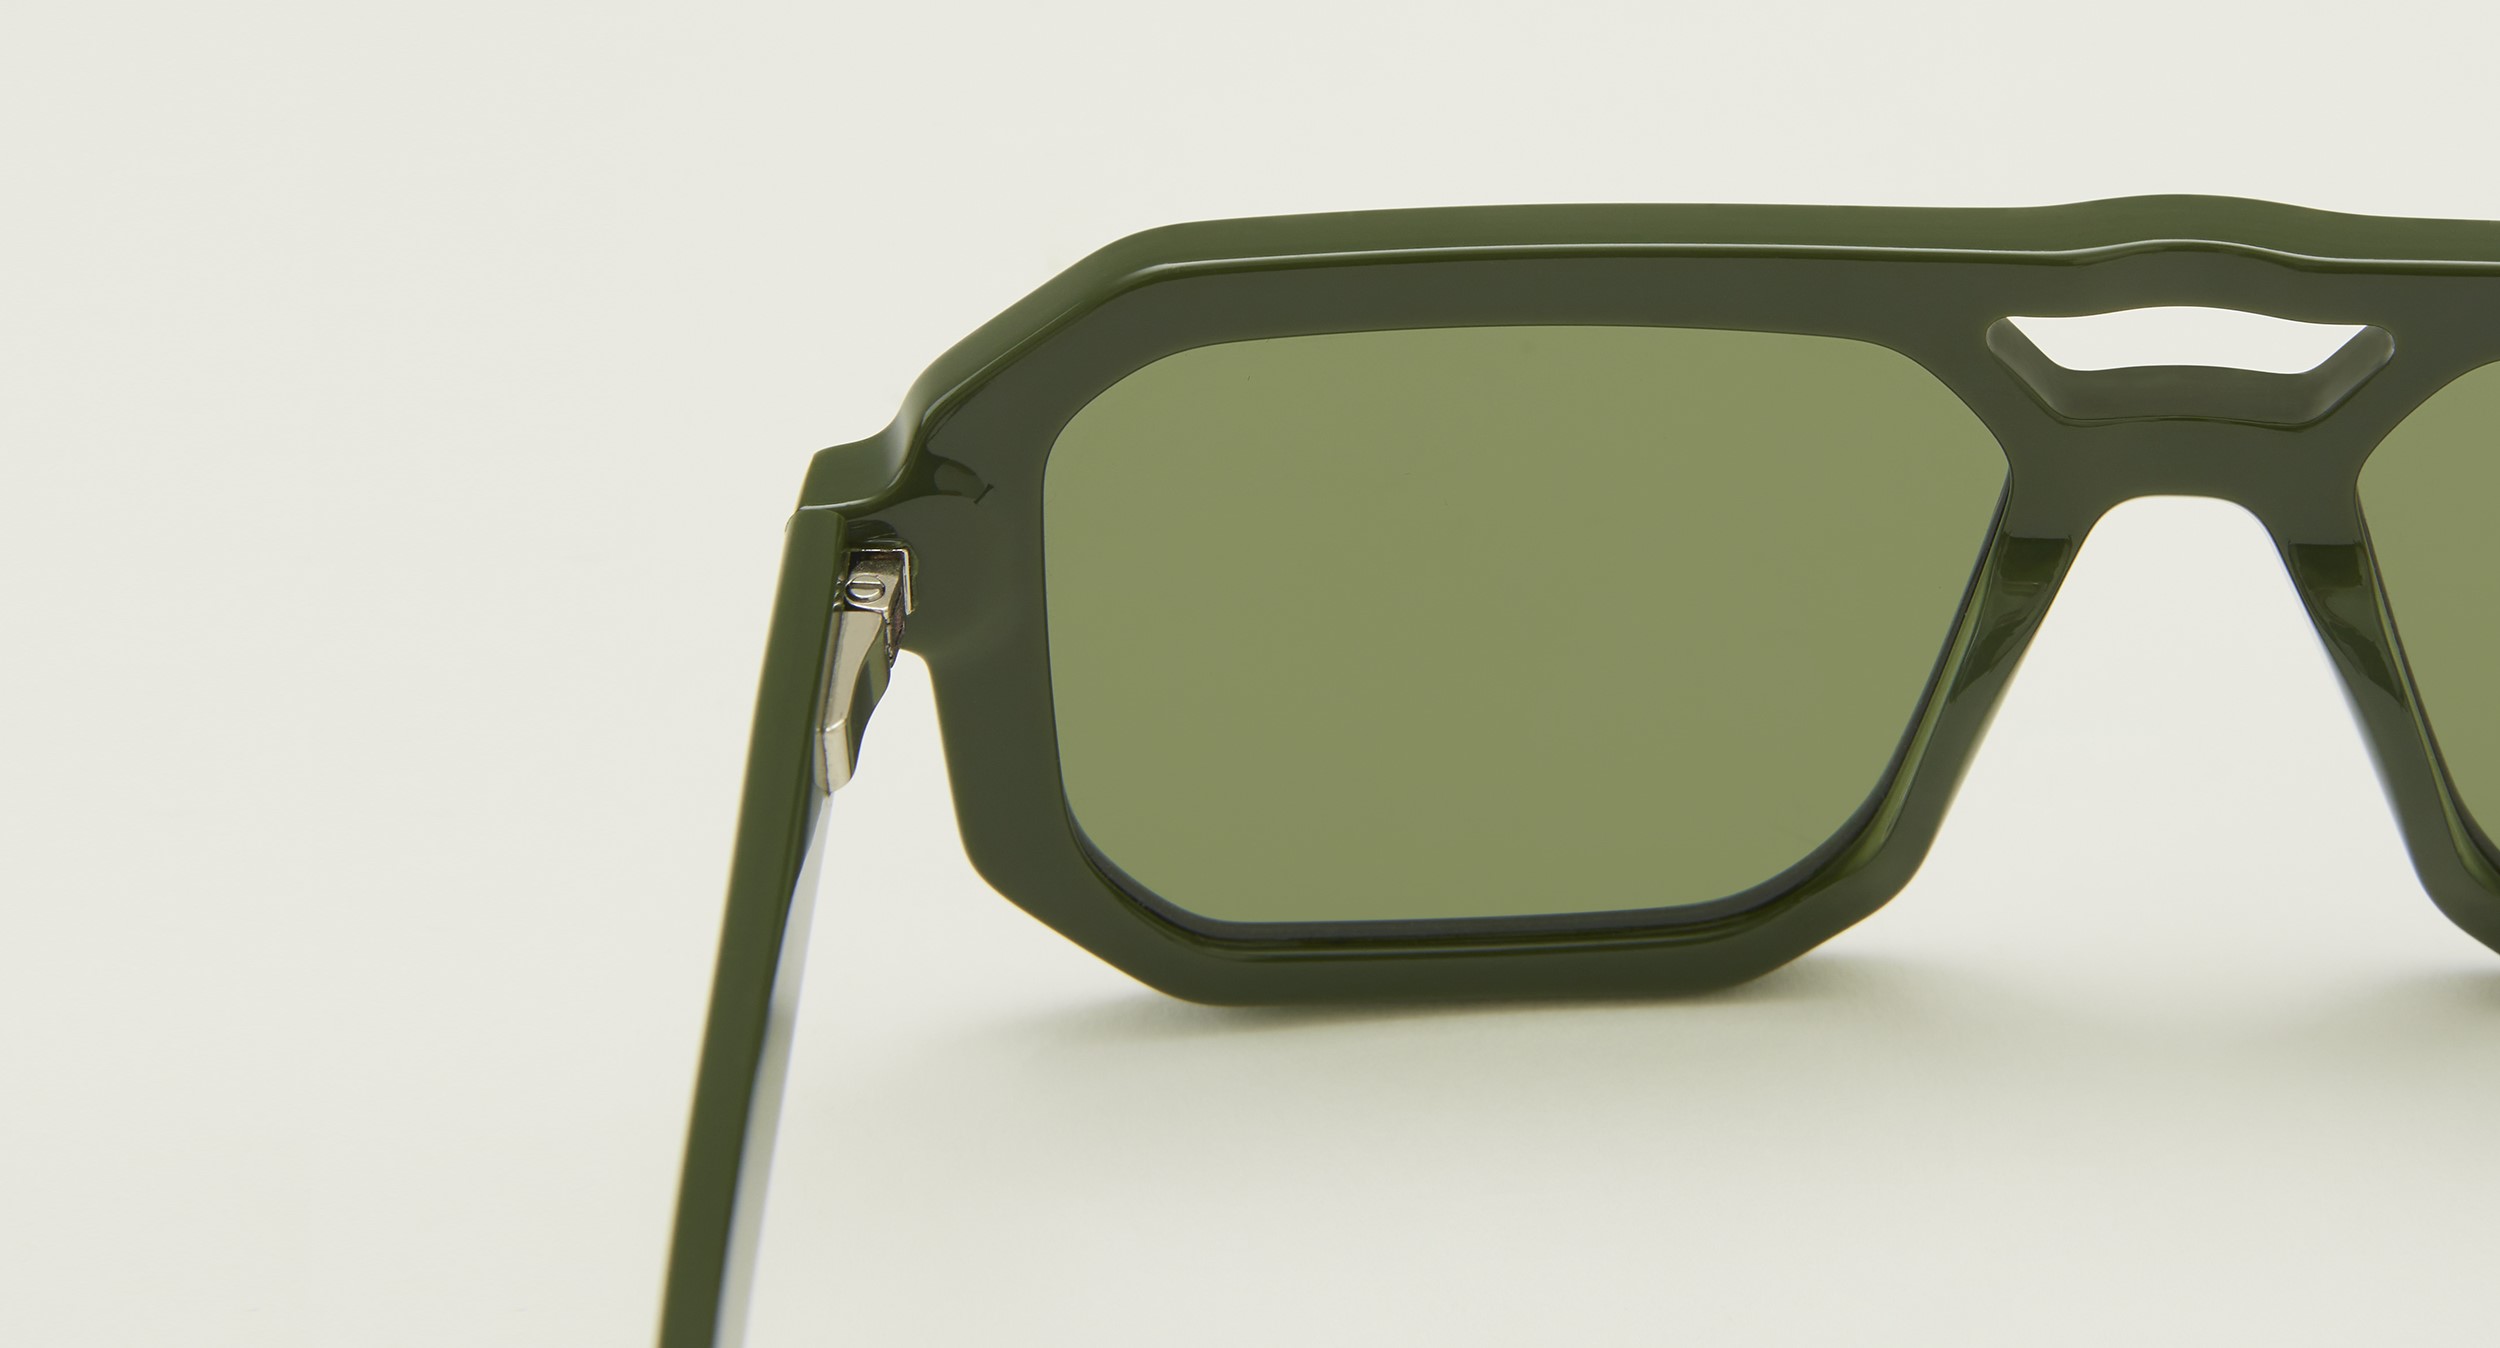 Photo Details of Angelo Army Green Reading Glasses in a room